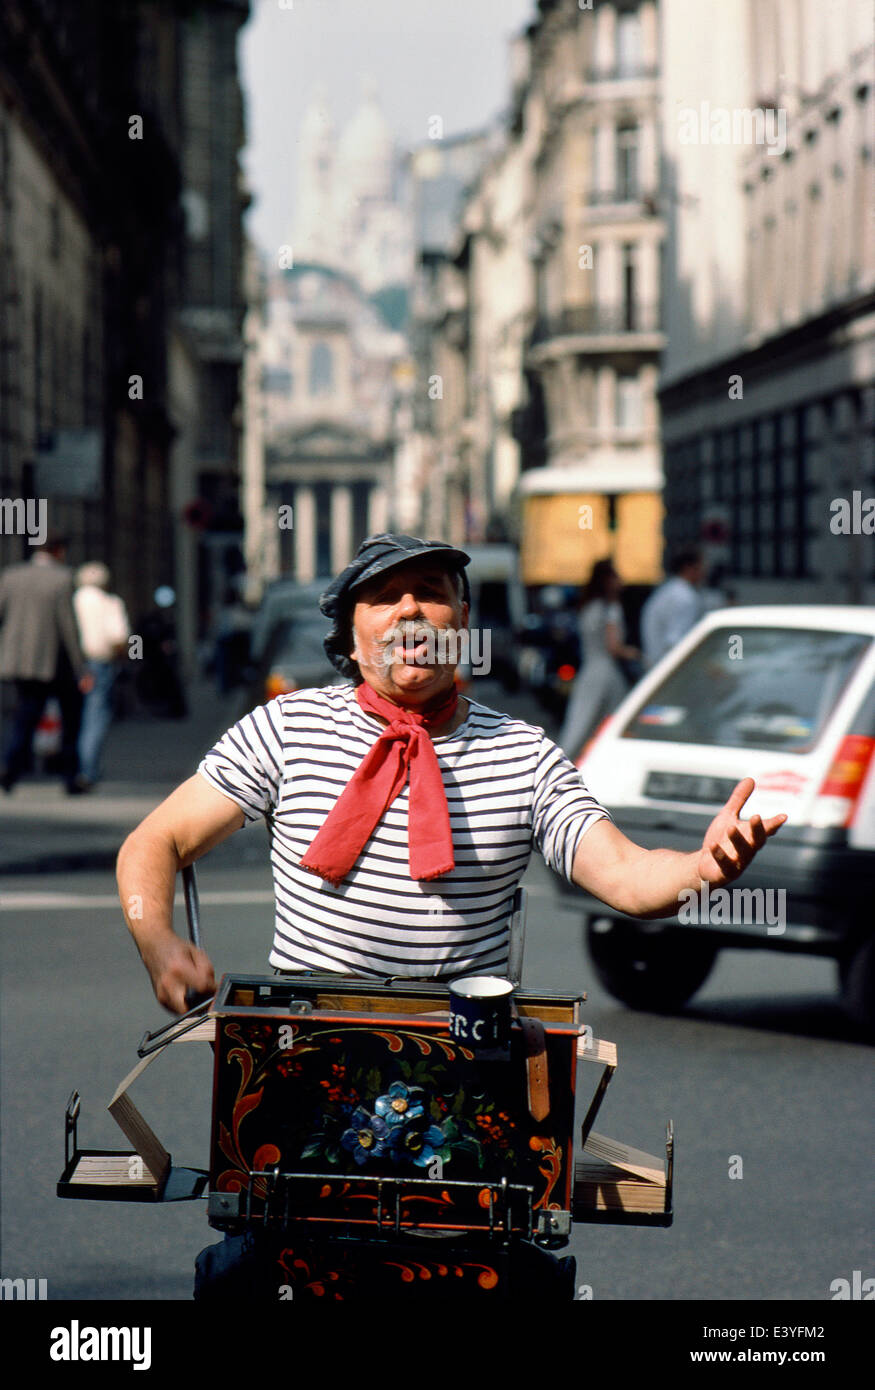 AJAXNETPHOTO. PARIS, FRANCE. - THE STREET SINGER AND ORGAN GRINDER RETRO IN FULL CHANT WITH SACRE COEUR IN THE DISTANCE. PHOTO:JONATHAN EASTLAND. Stock Photo